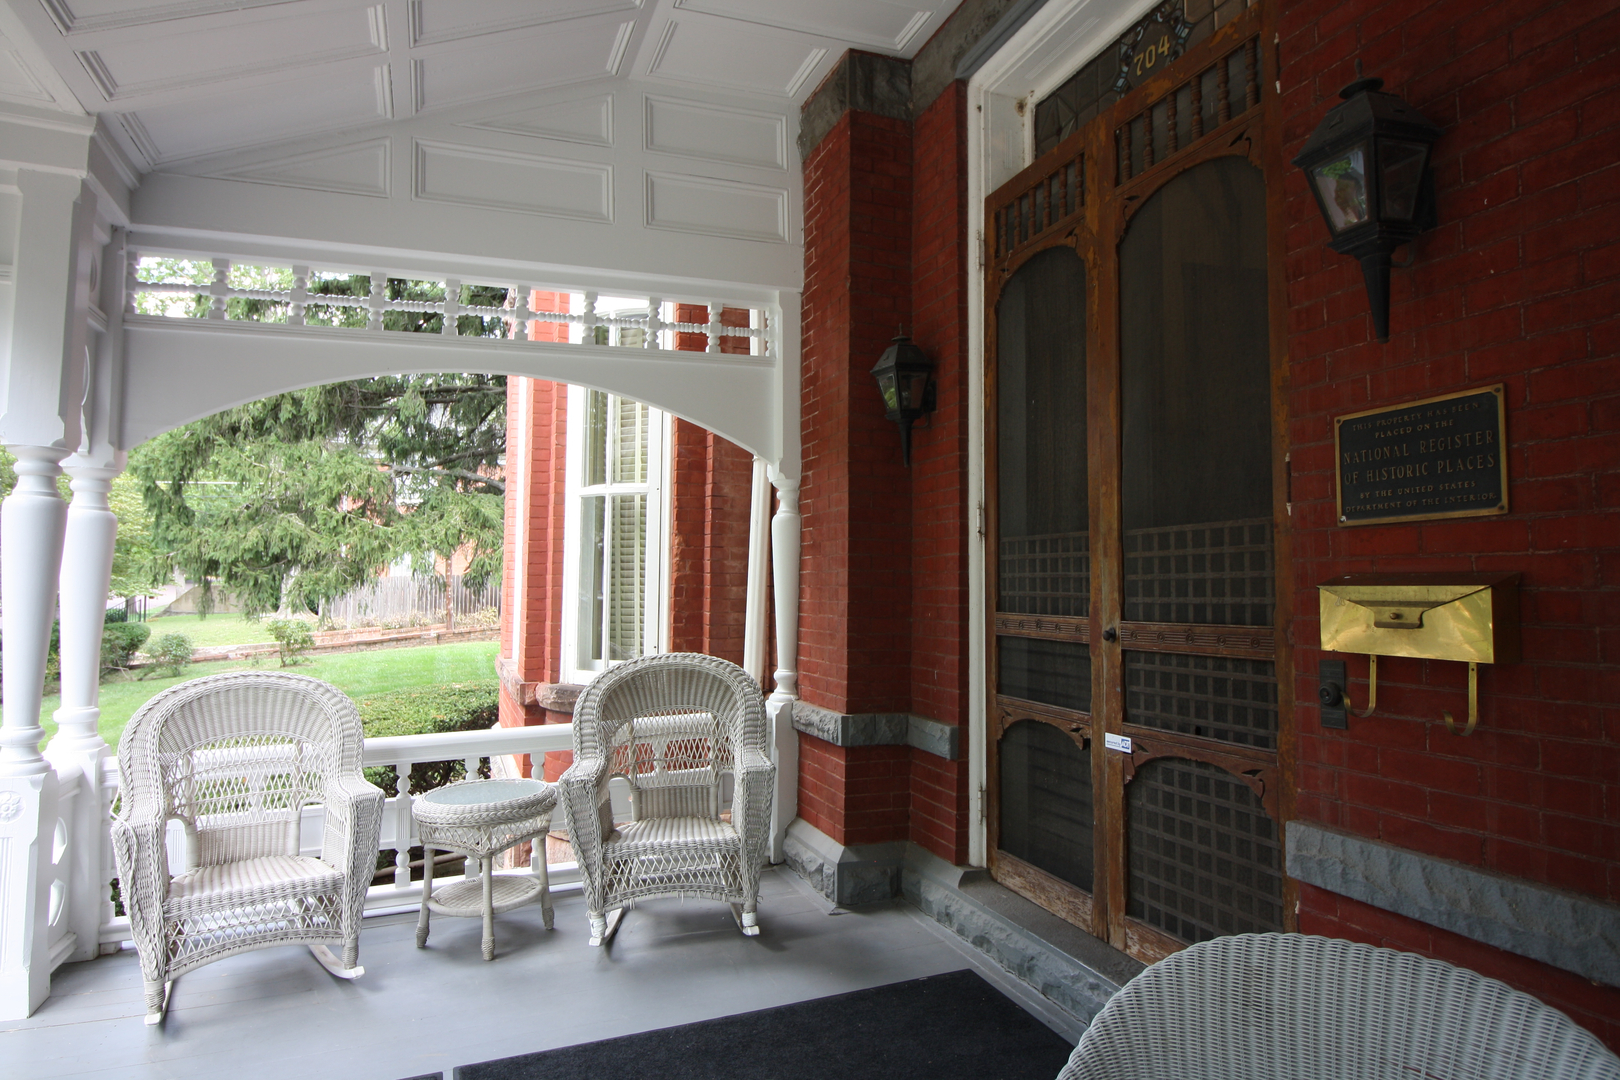 Porch of the Muchnic Art Gallery